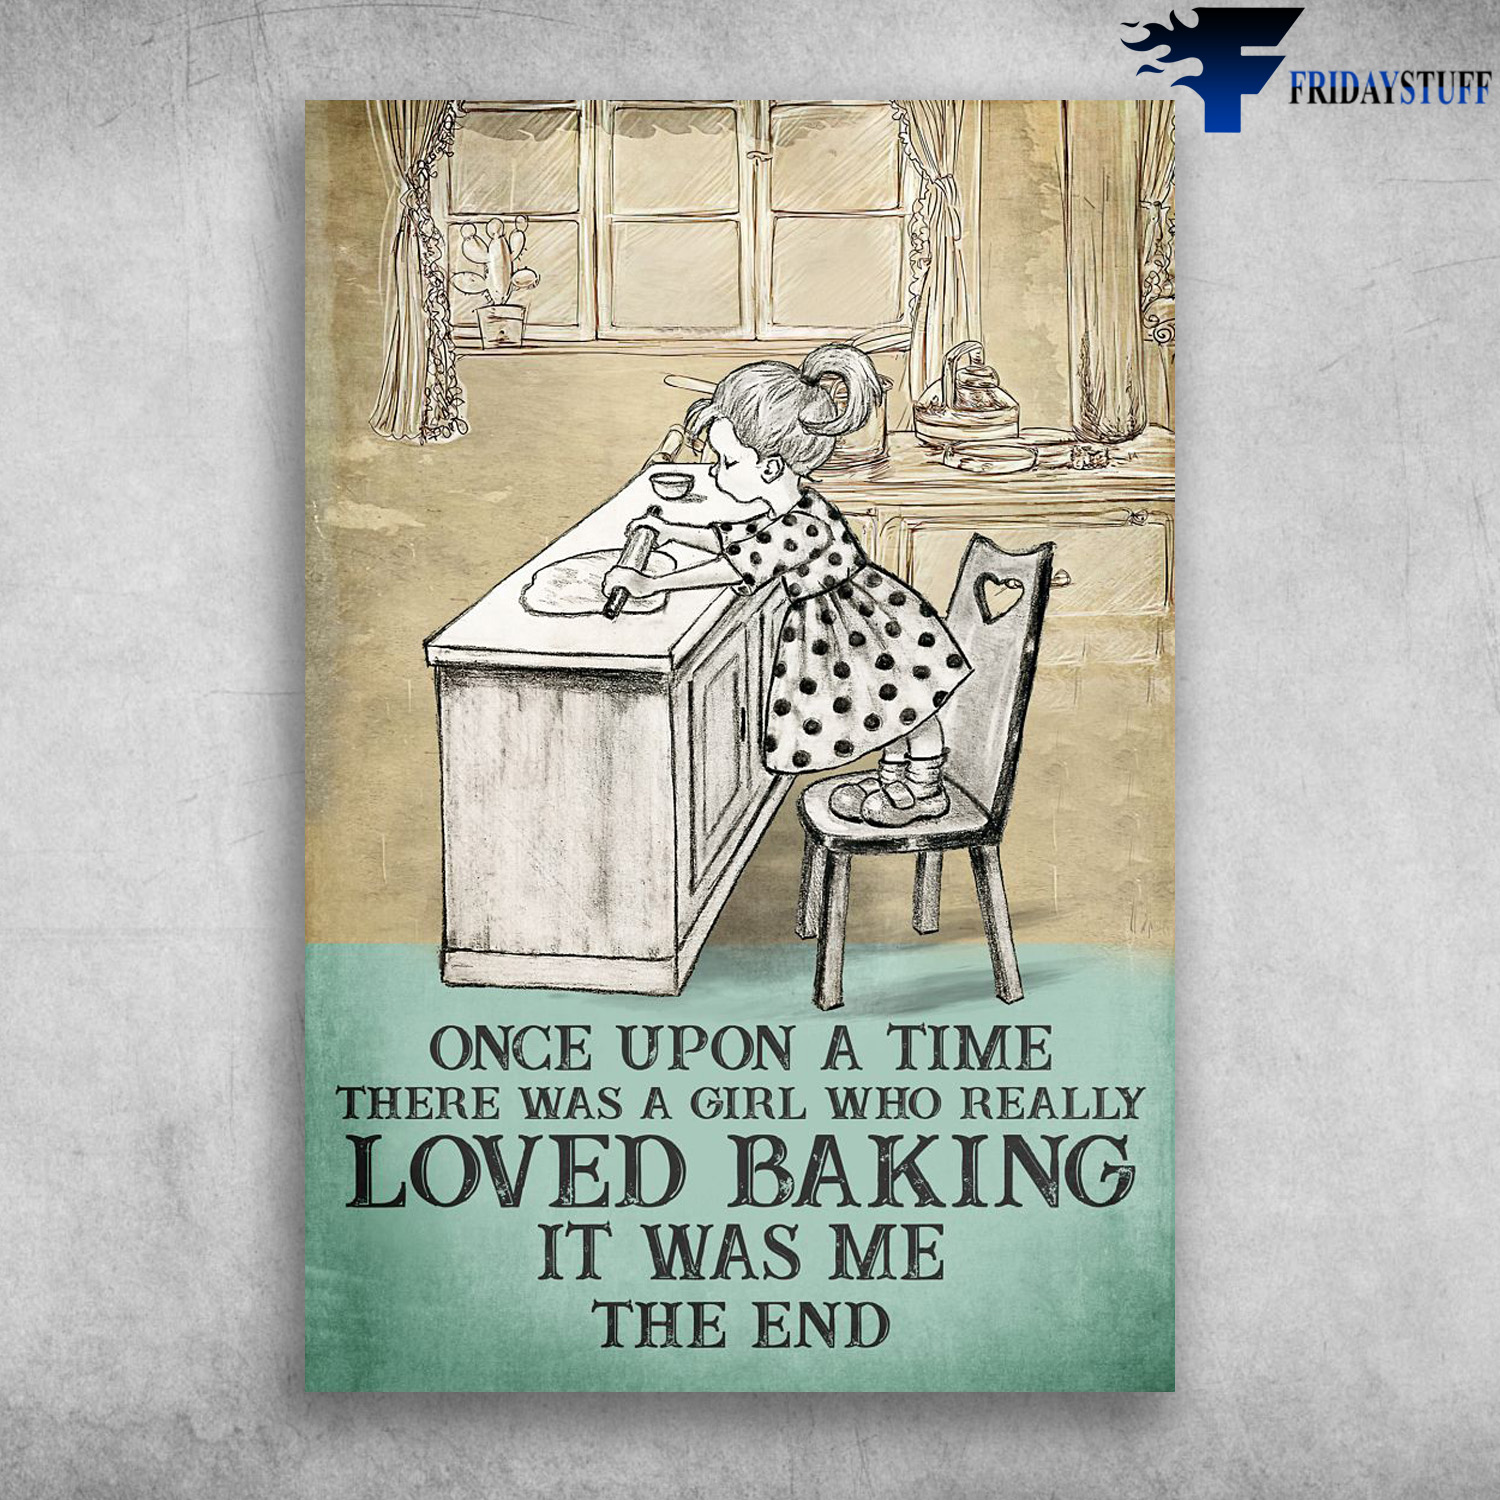 Little Girl Baking - Once Upon A Time, There Was A Girl, Who Really Loved Baking, It Was Me, The End